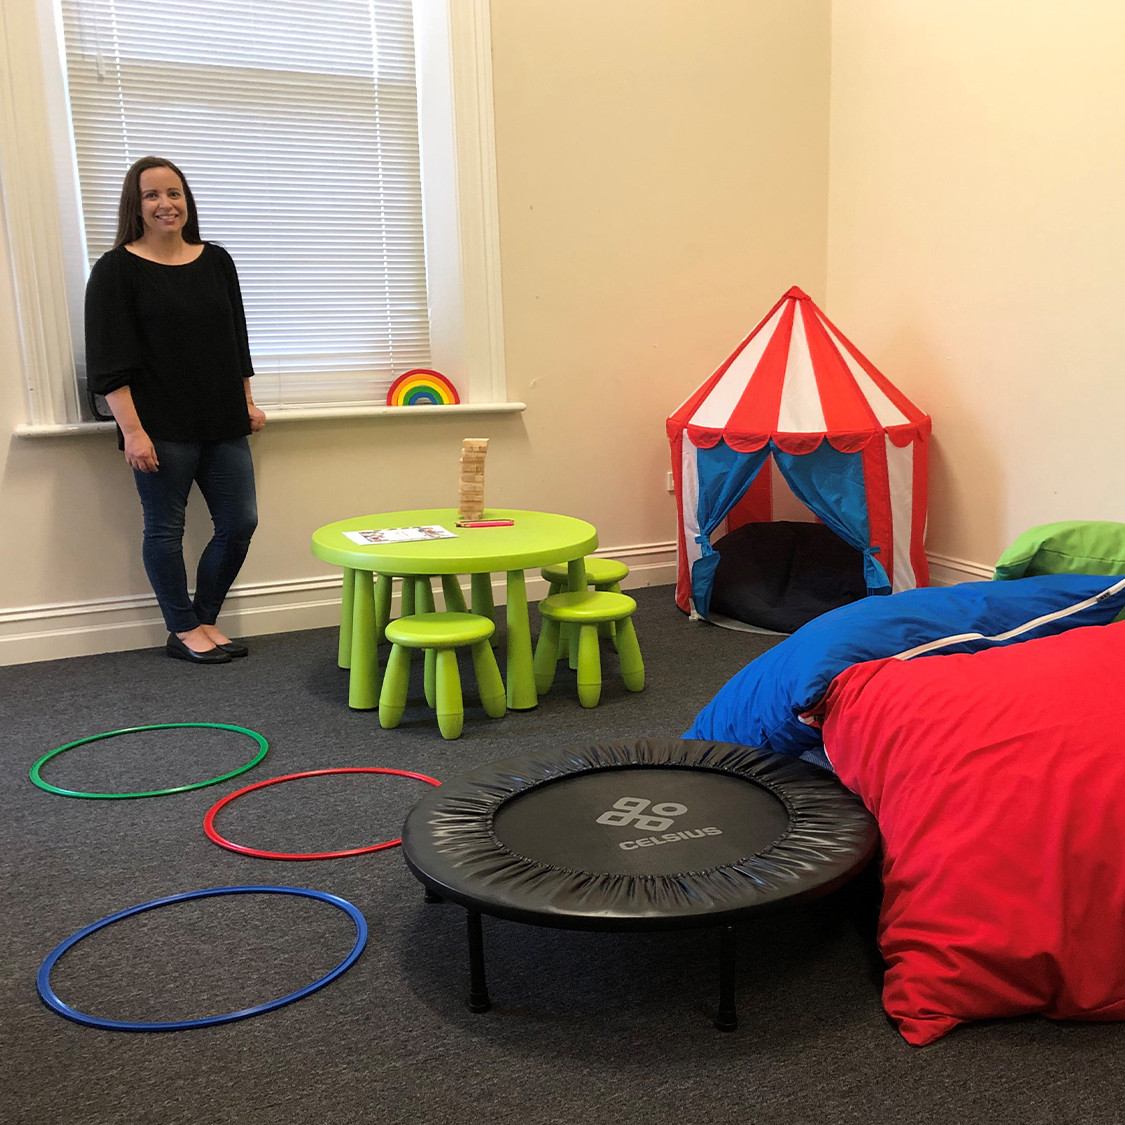 A kid's play room with a mini trampoline, a small text, some hoops, bean bags, and a table.